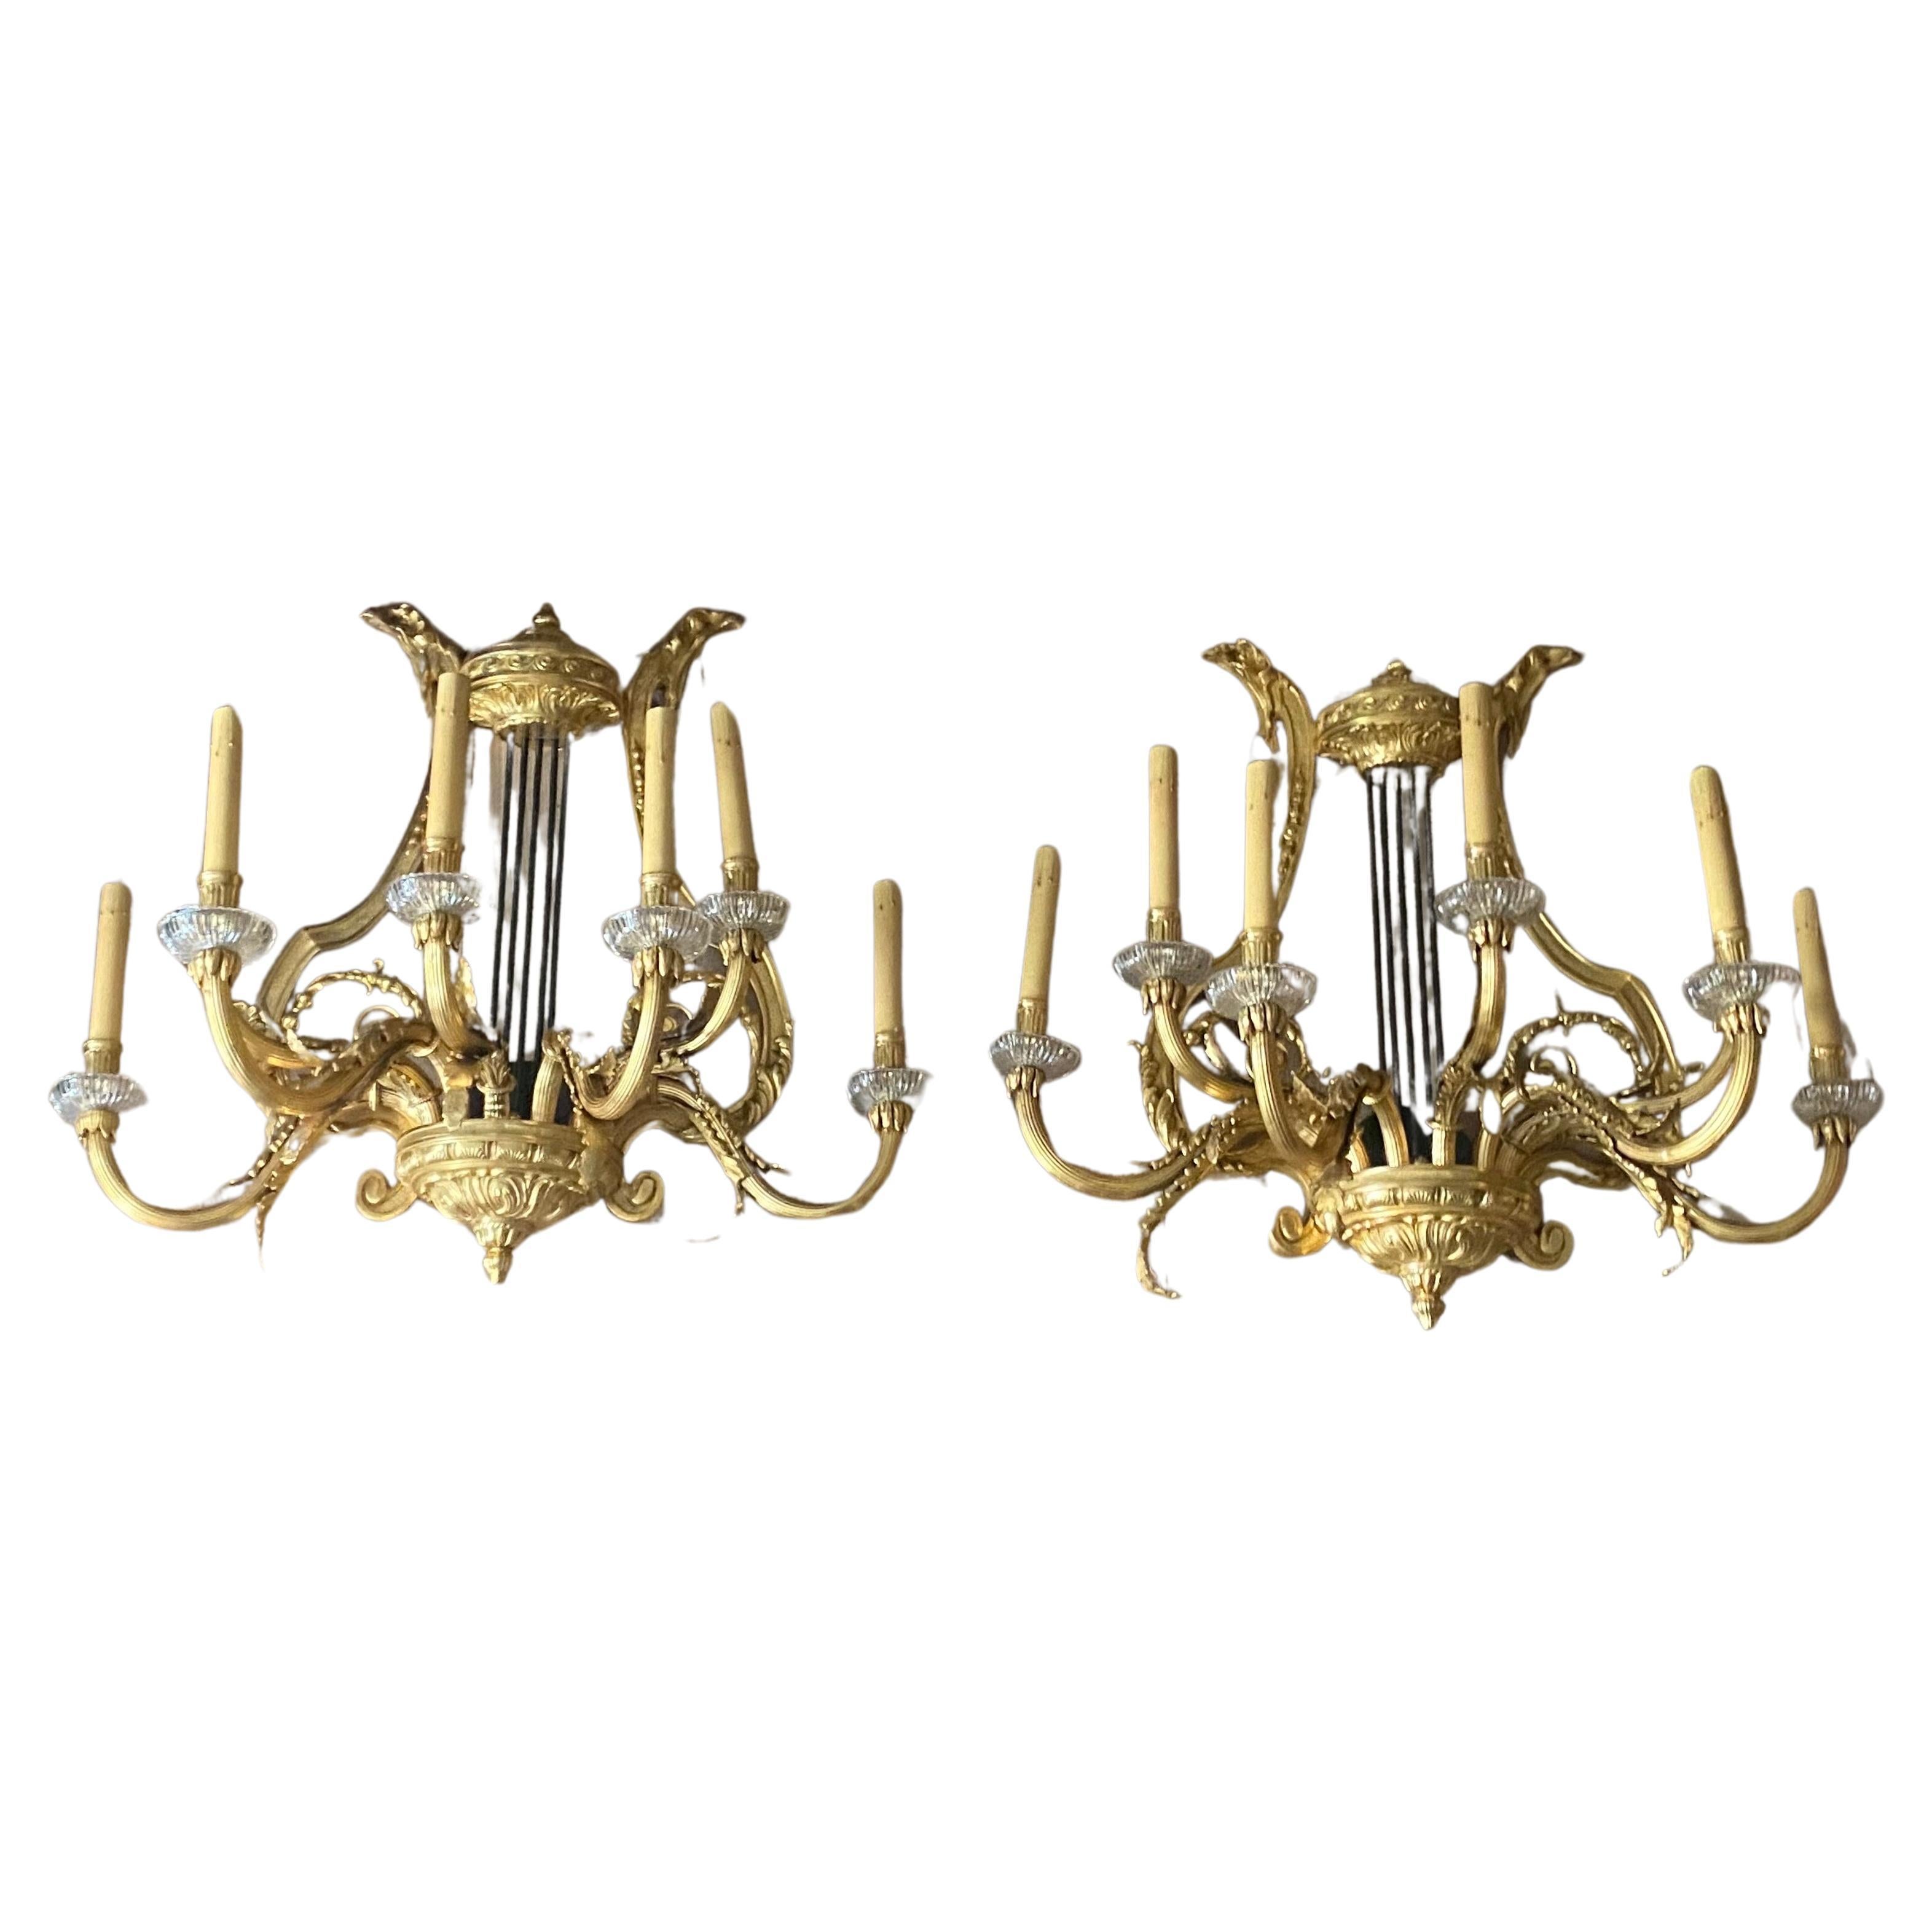 Huge Pair of 19th Century French Gilt Bronze Dore Wall Sconces For Sale 10